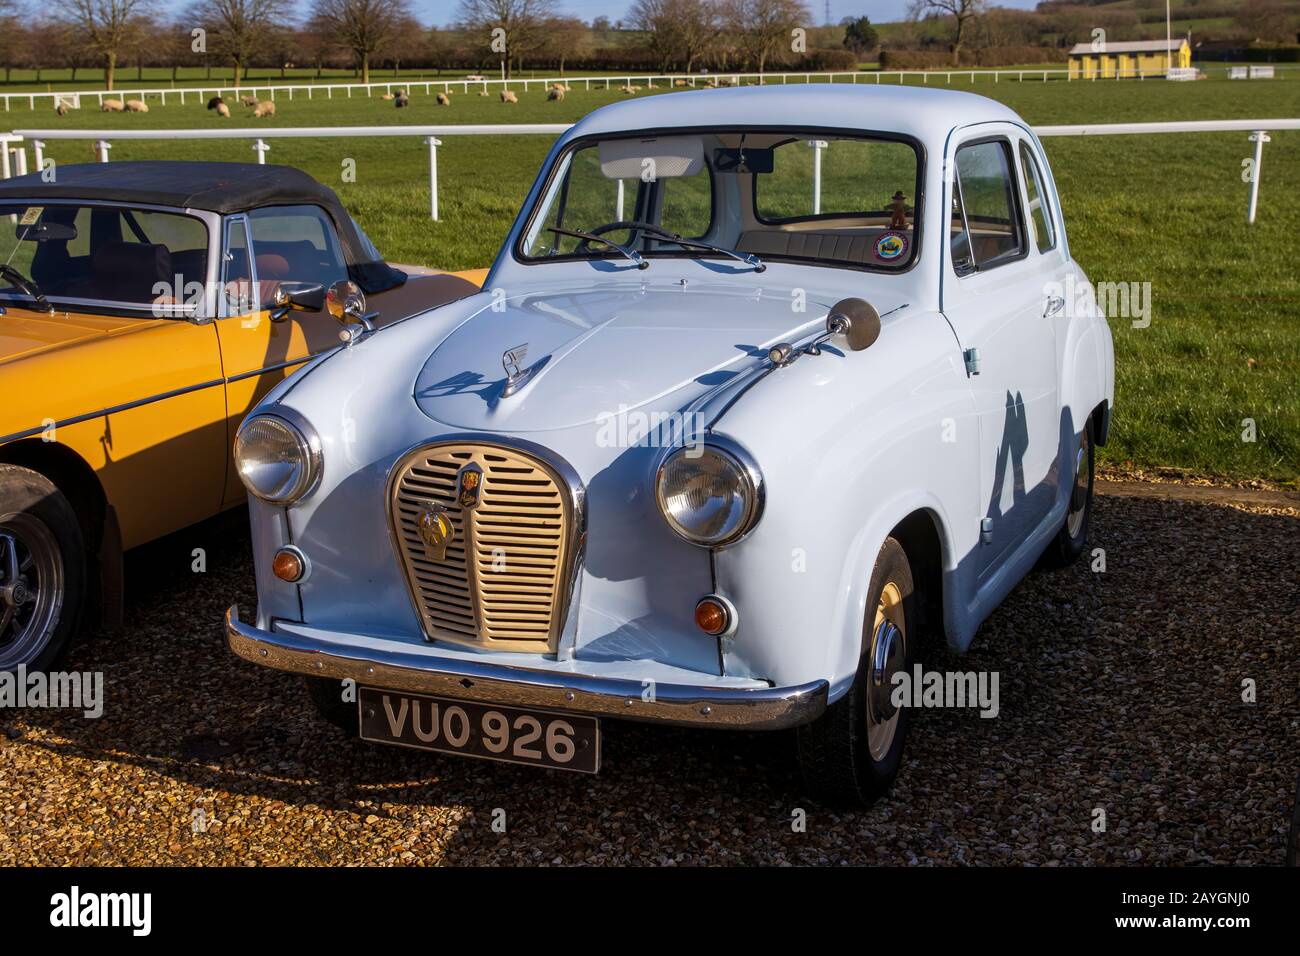 Austin A35, 1956, Reg No: VUO 926, at The Great Western Classic Car Show, Shepton Mallet UK, Febuary 08, 2020 Stock Photo